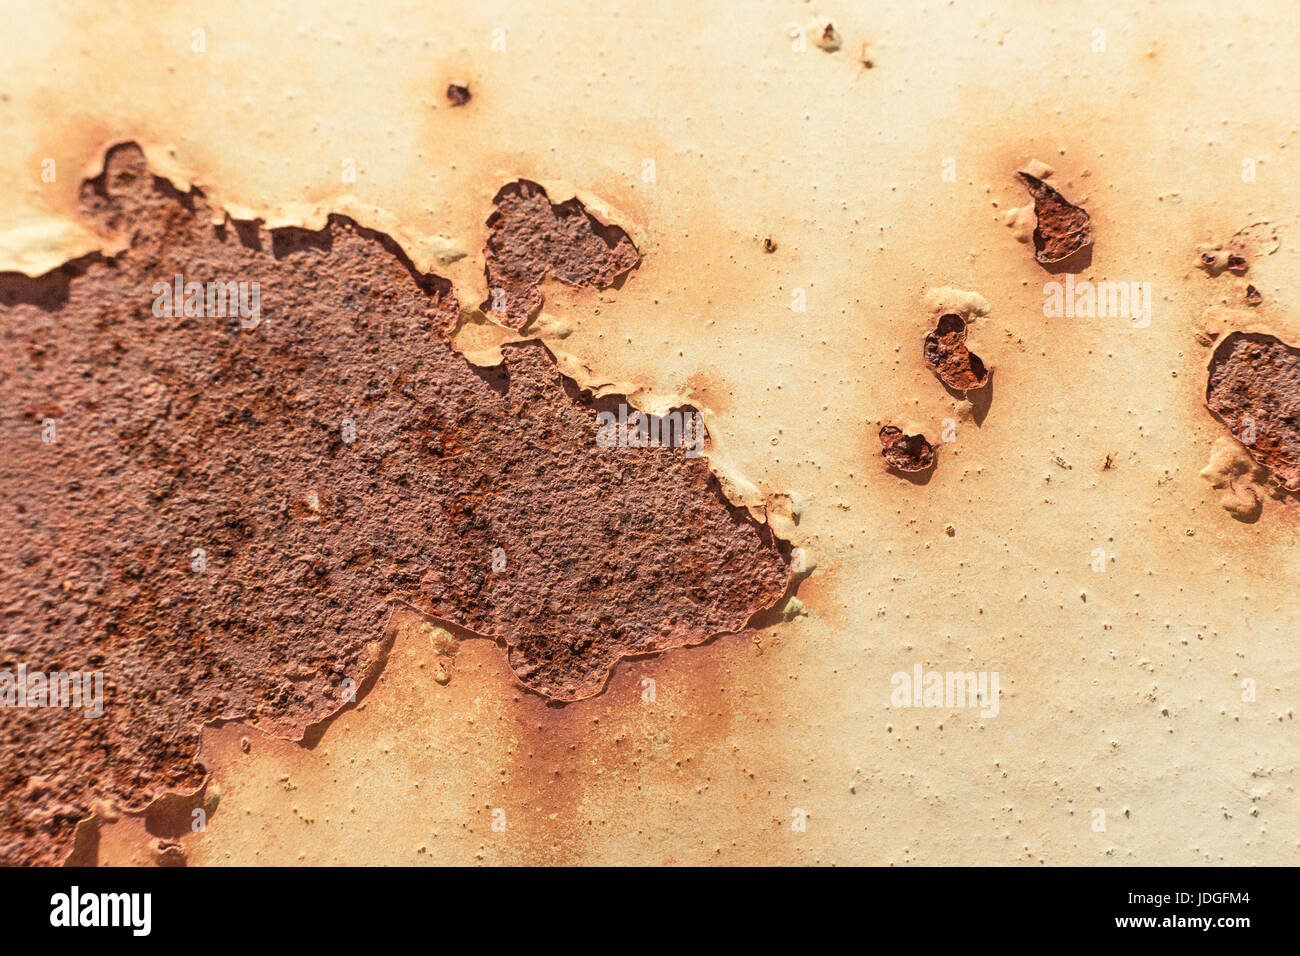 Paint flaking off rusty surface Stock Photo